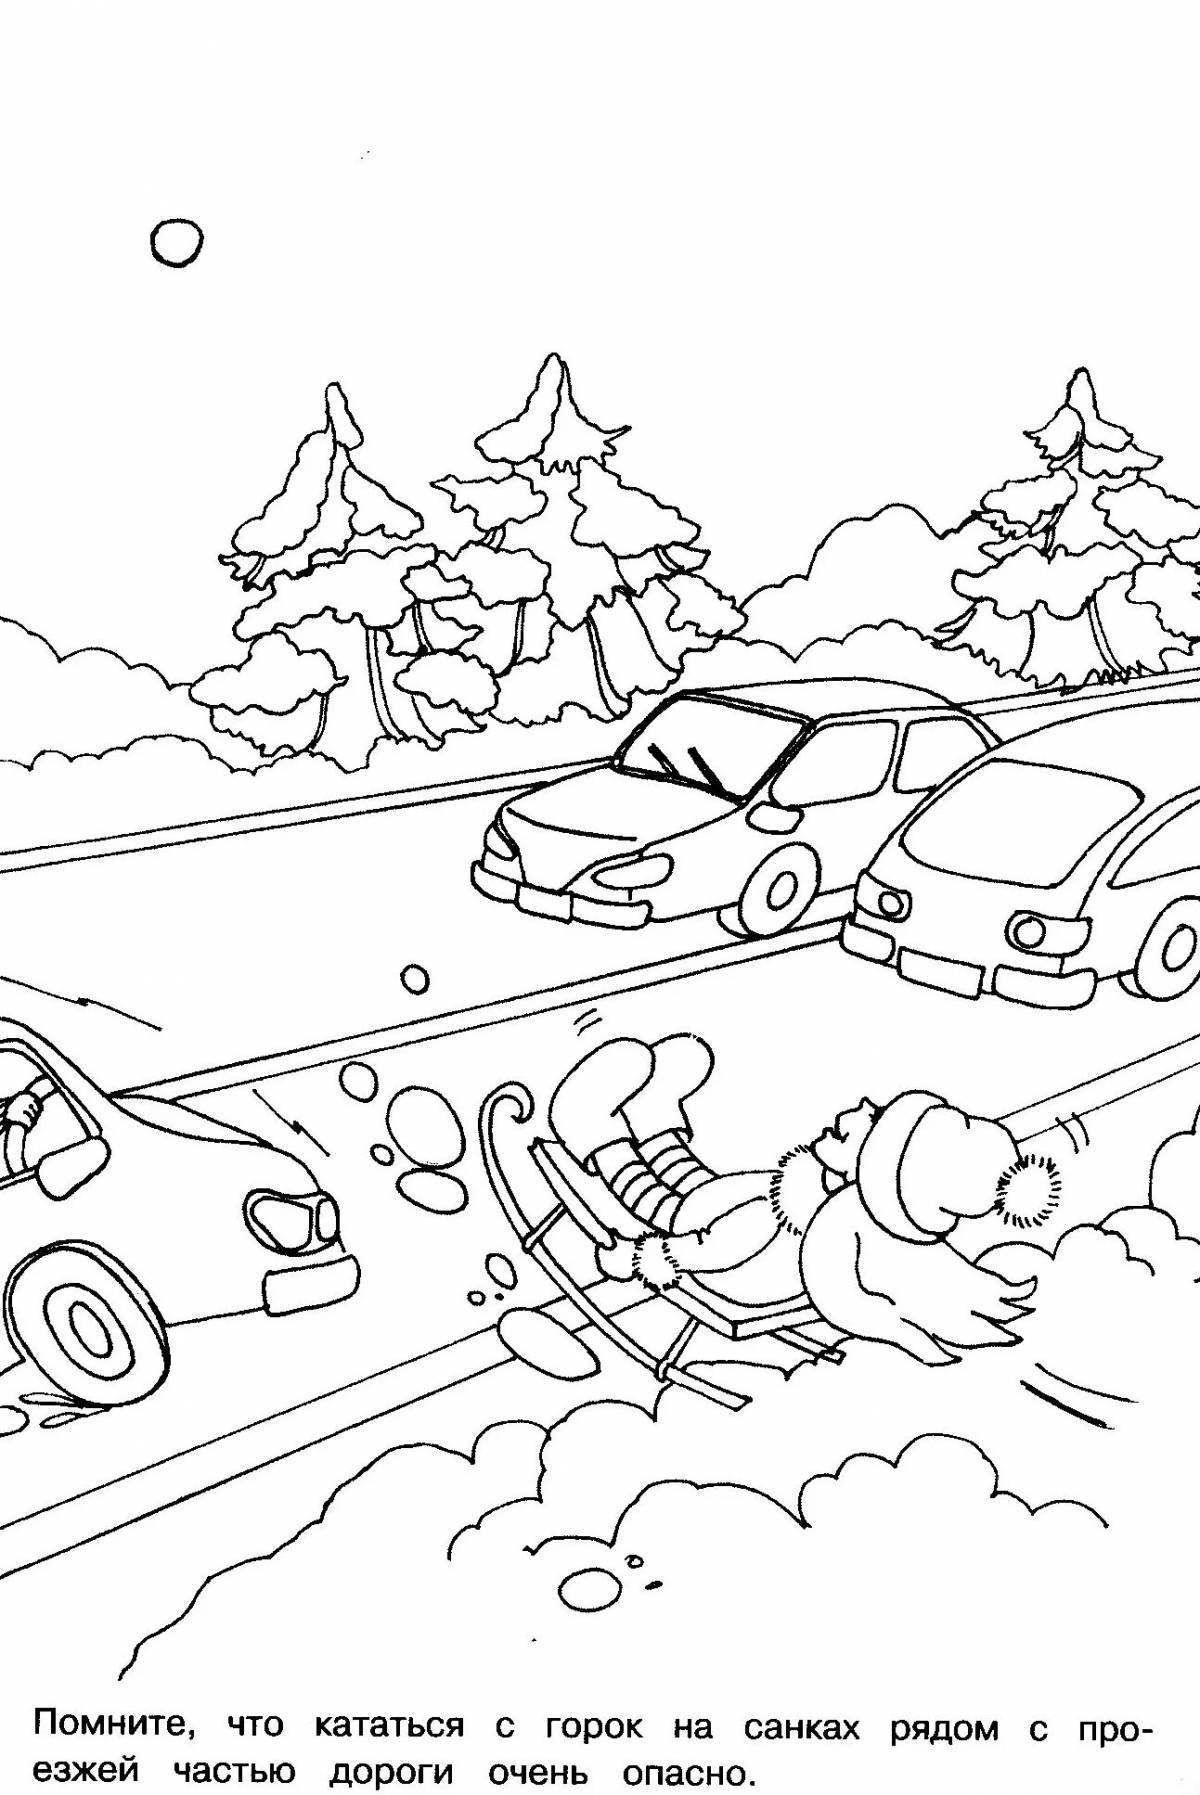 Adorable traffic safety coloring page